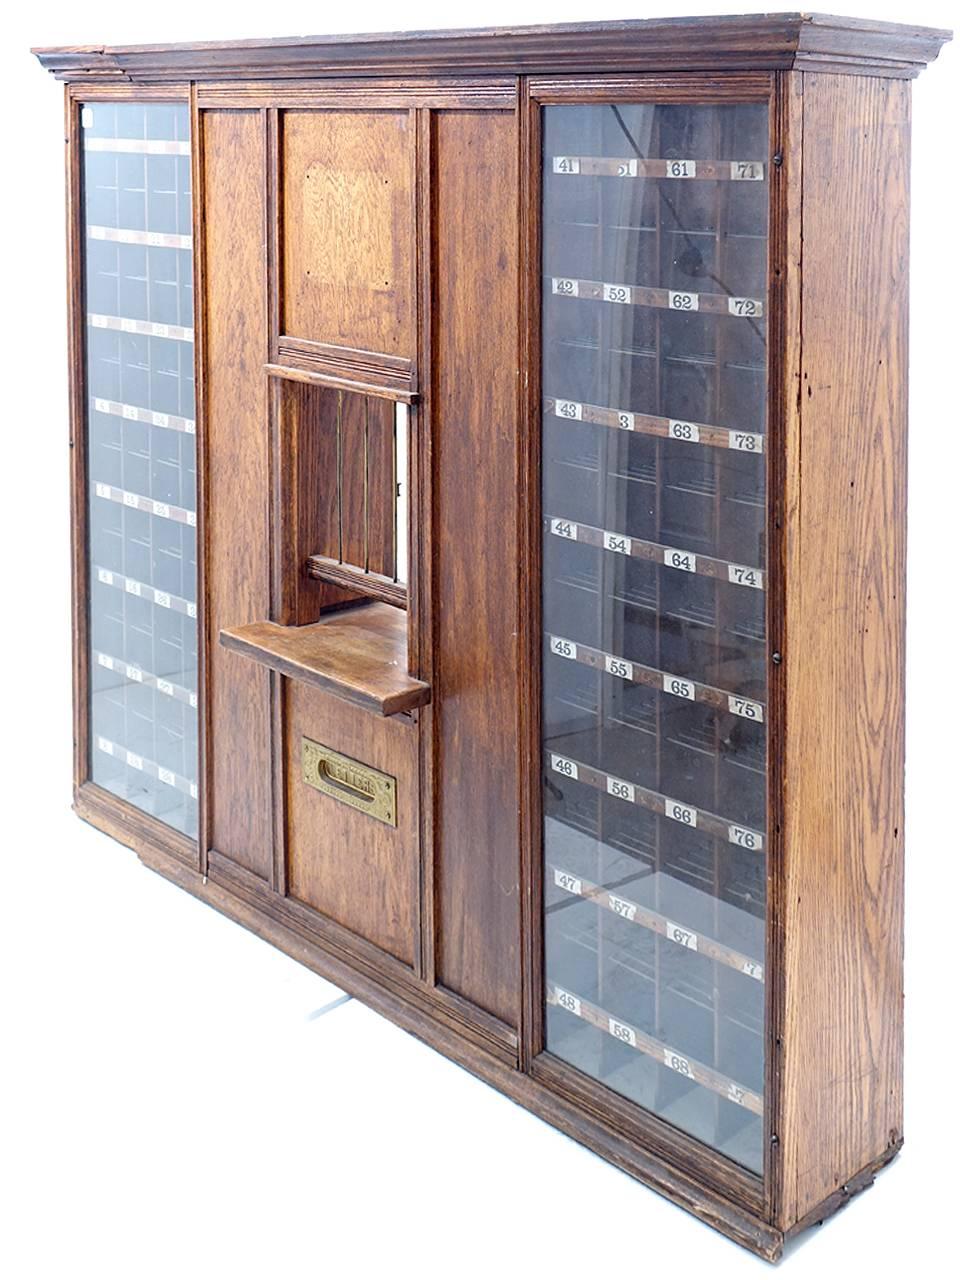 This is a beautiful early US post office window. It still has the original numbered slots to sort mail, the brass mail slot reads letters. It has the original gated window ant two doors to close it. Behind the mail slot is a draw to catch letters.